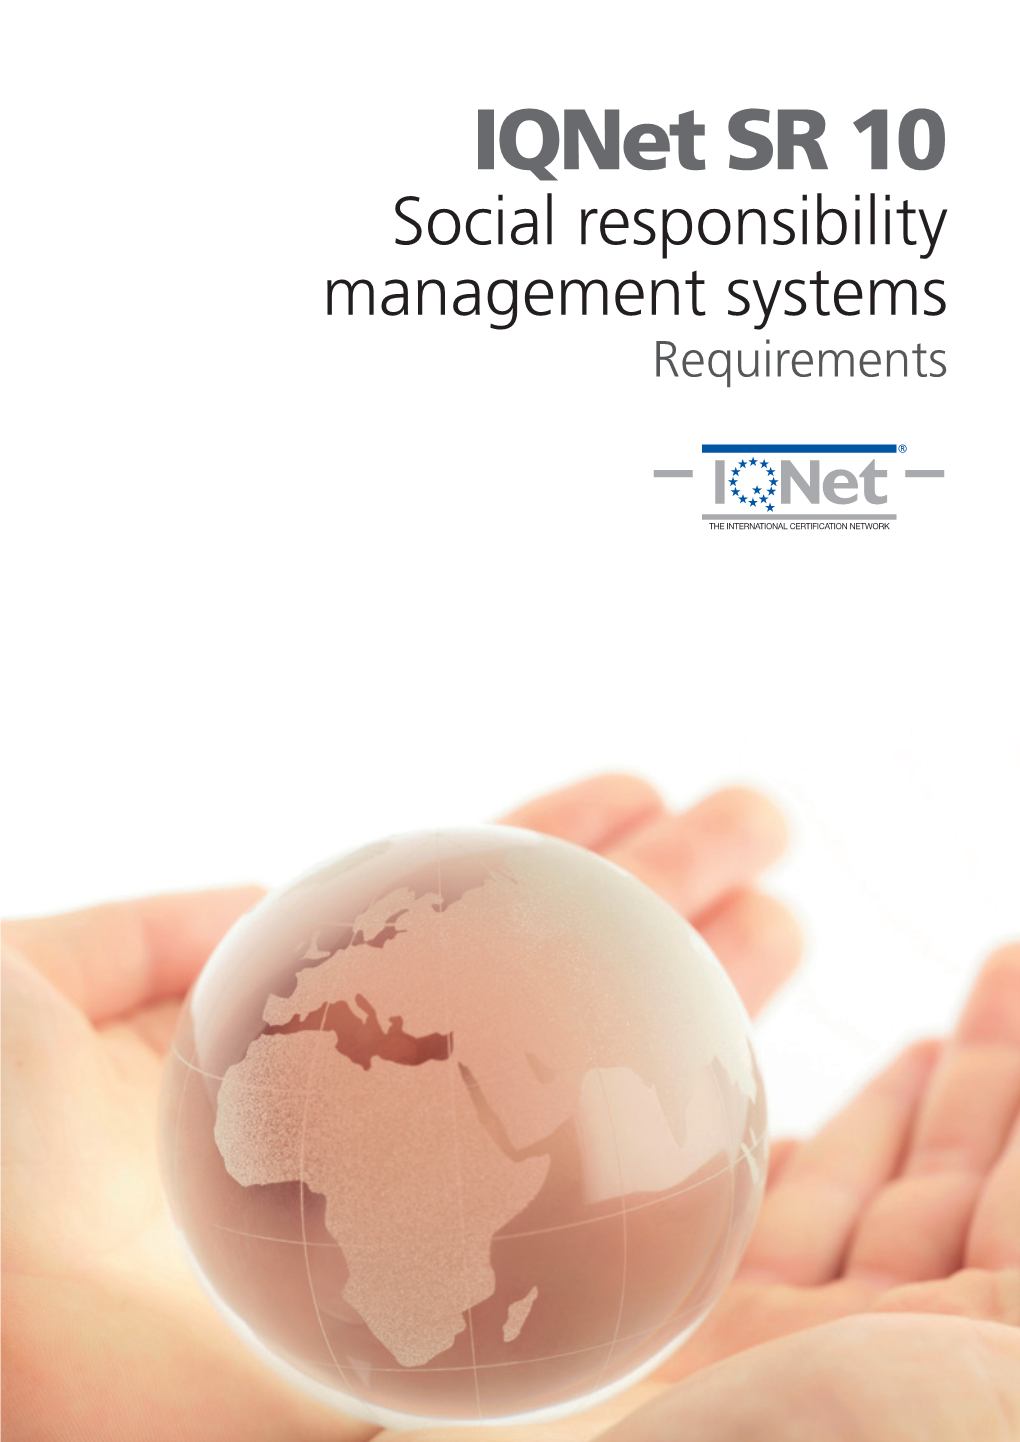 Iqnet SR 10 Social Responsibility Management Systems Requirements